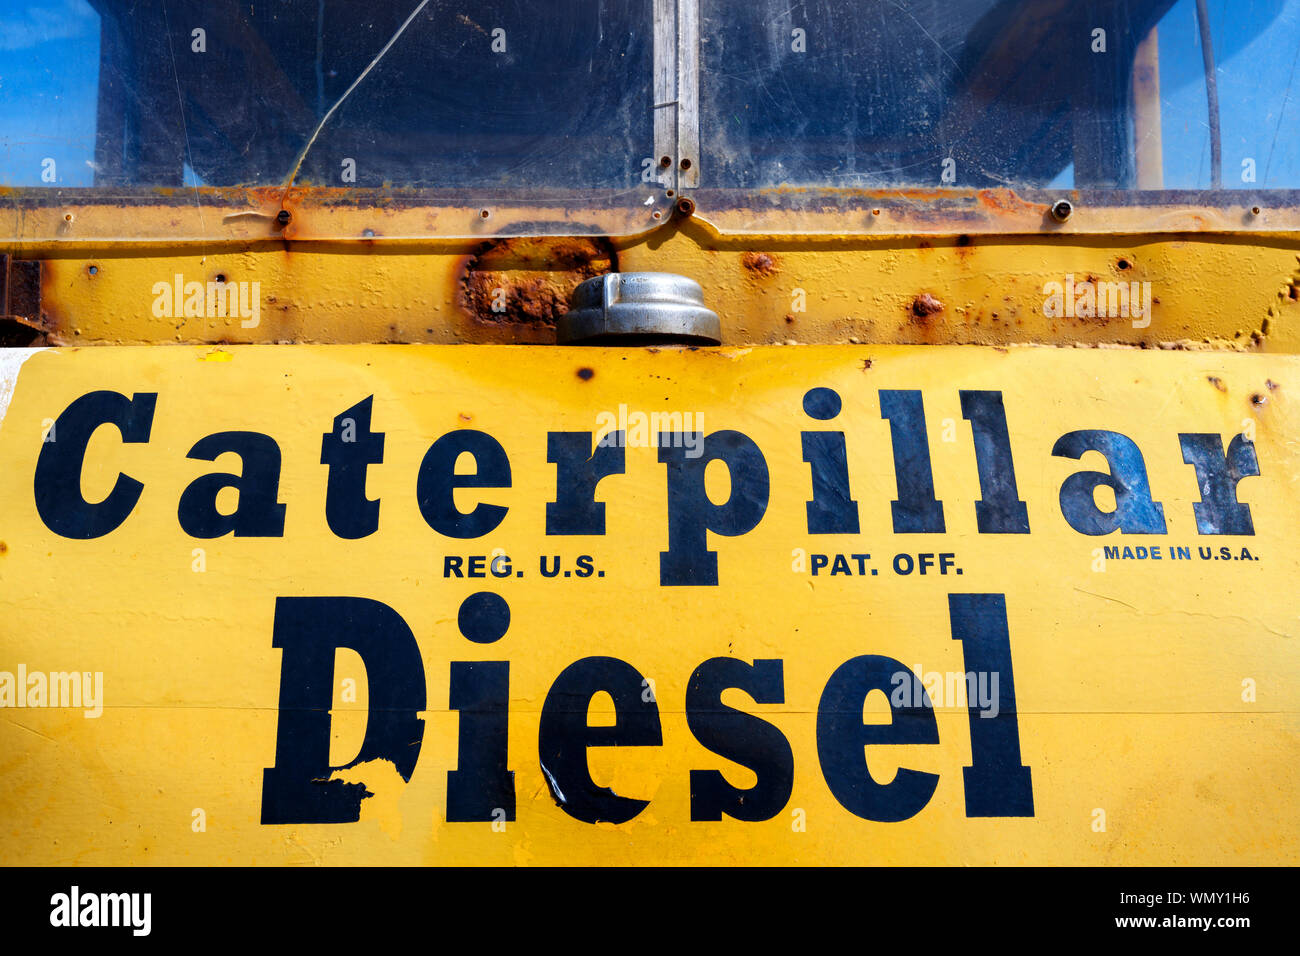 Caterpillar bulldozer used by fishermen to pull boats out of the North sea, Aldeburgh, Suffolk, UK, Stock Photo